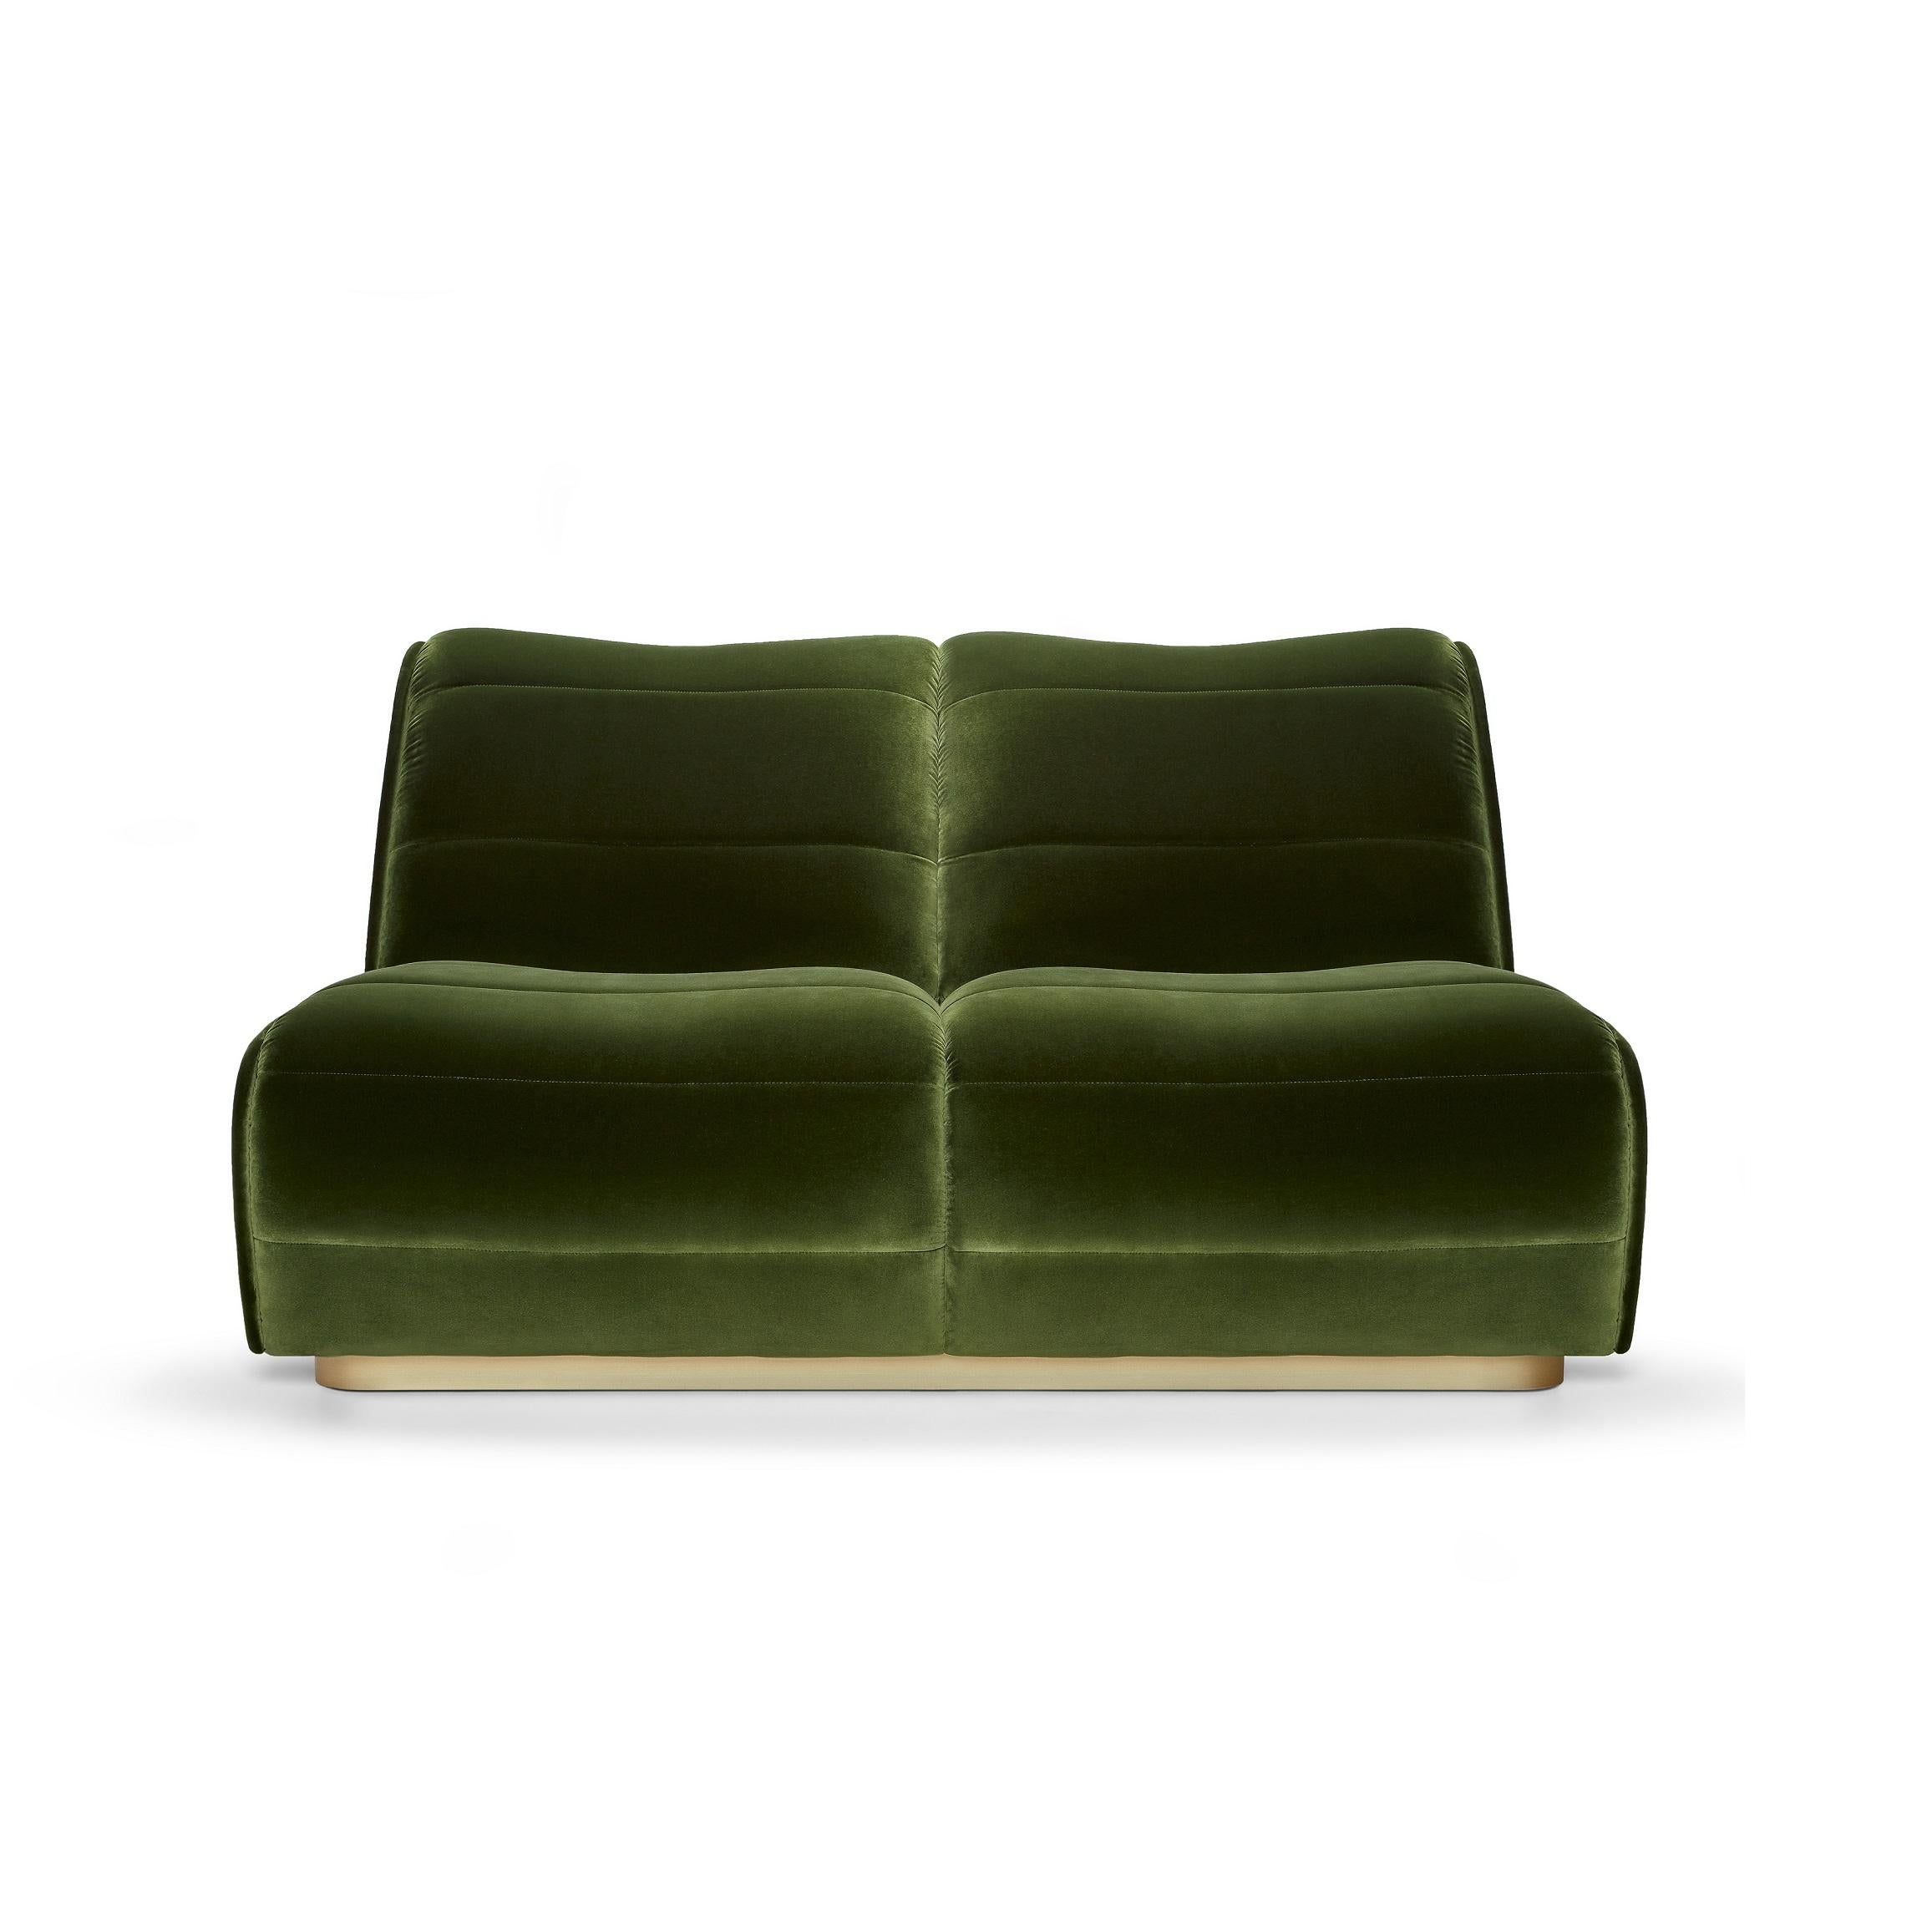  This sofa is an elevated homage to the golden age of gentleman drivers. The piece’s flawless structure is deceivingly simple, yet undeniably striking. The detailed upholstery and seaming bears the mark of true craftsmanship. Its sensuous lines are